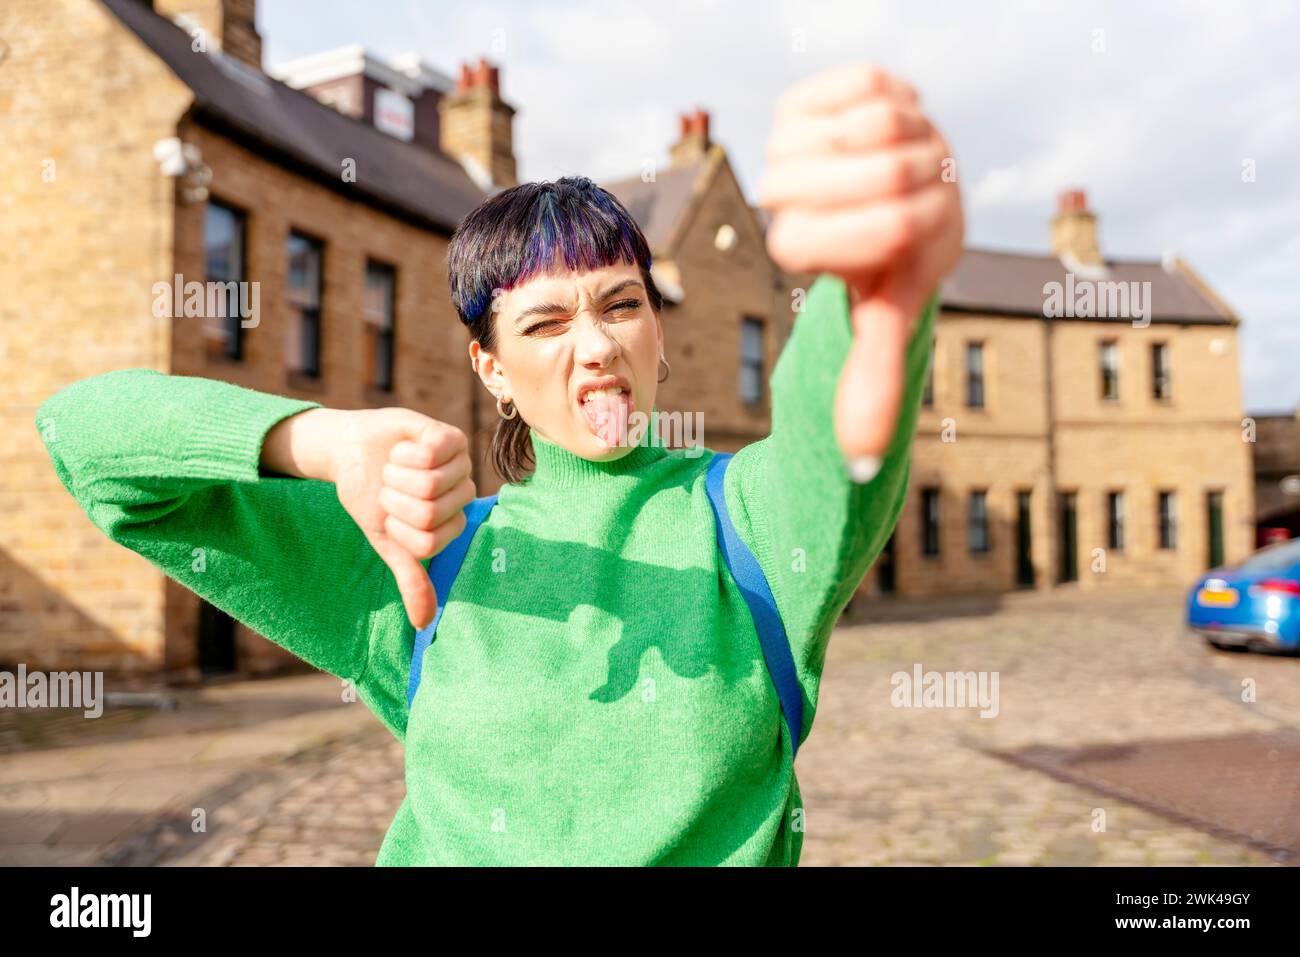 woman in green sweater giving thumb down gesture, dislikes something, having disgusting expression, showing disapproval sign outside and tongue. Negat Stock Photo